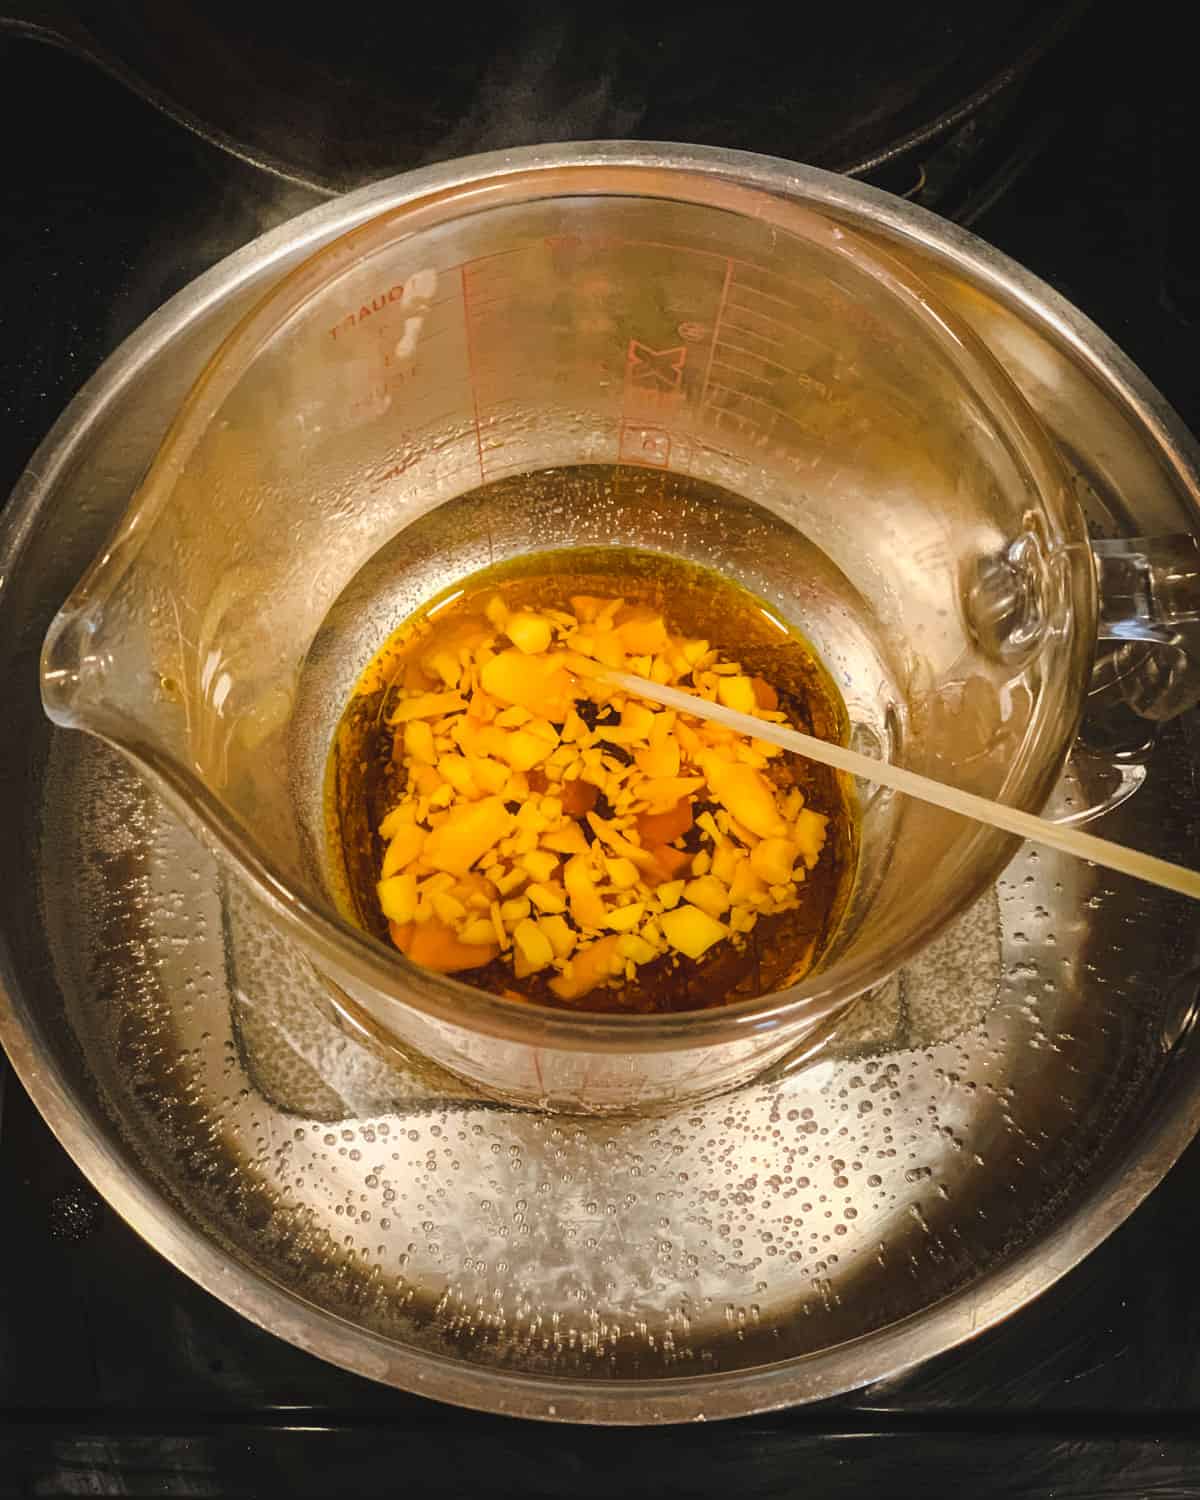 melting the beeswax into the oil in a double boiler